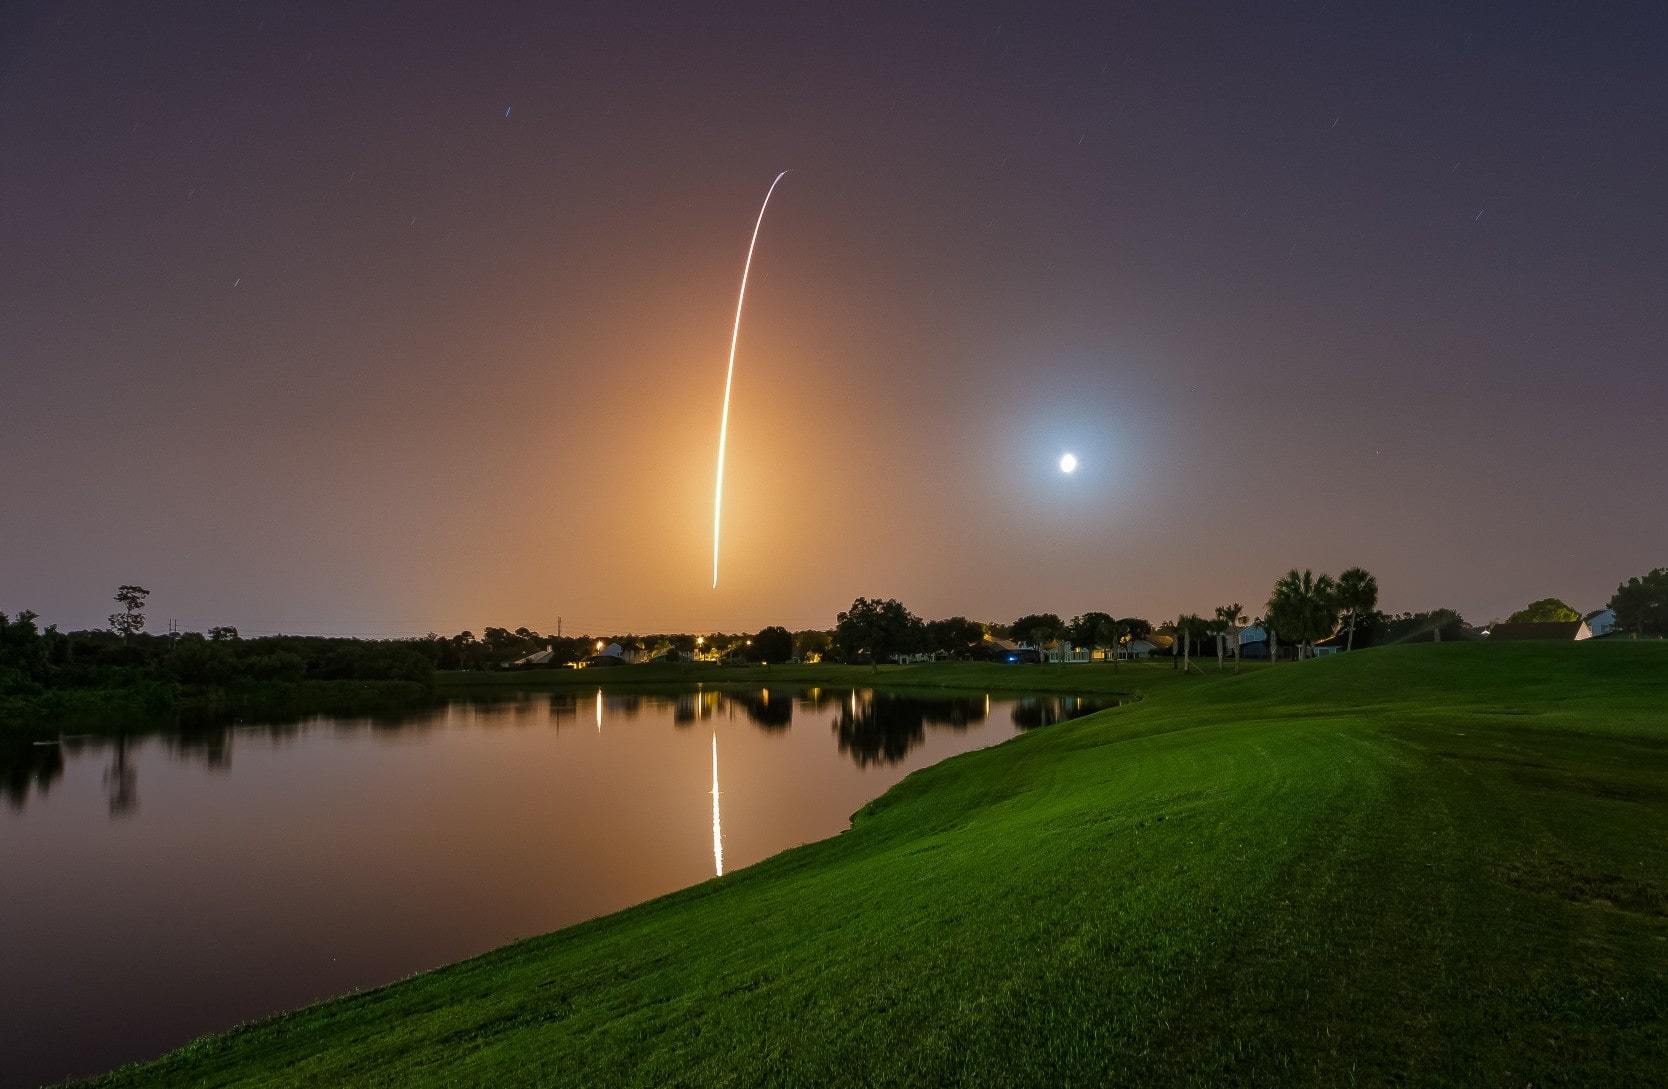 Trail of a rocket against the night sky in Cape Canaveral, Florida